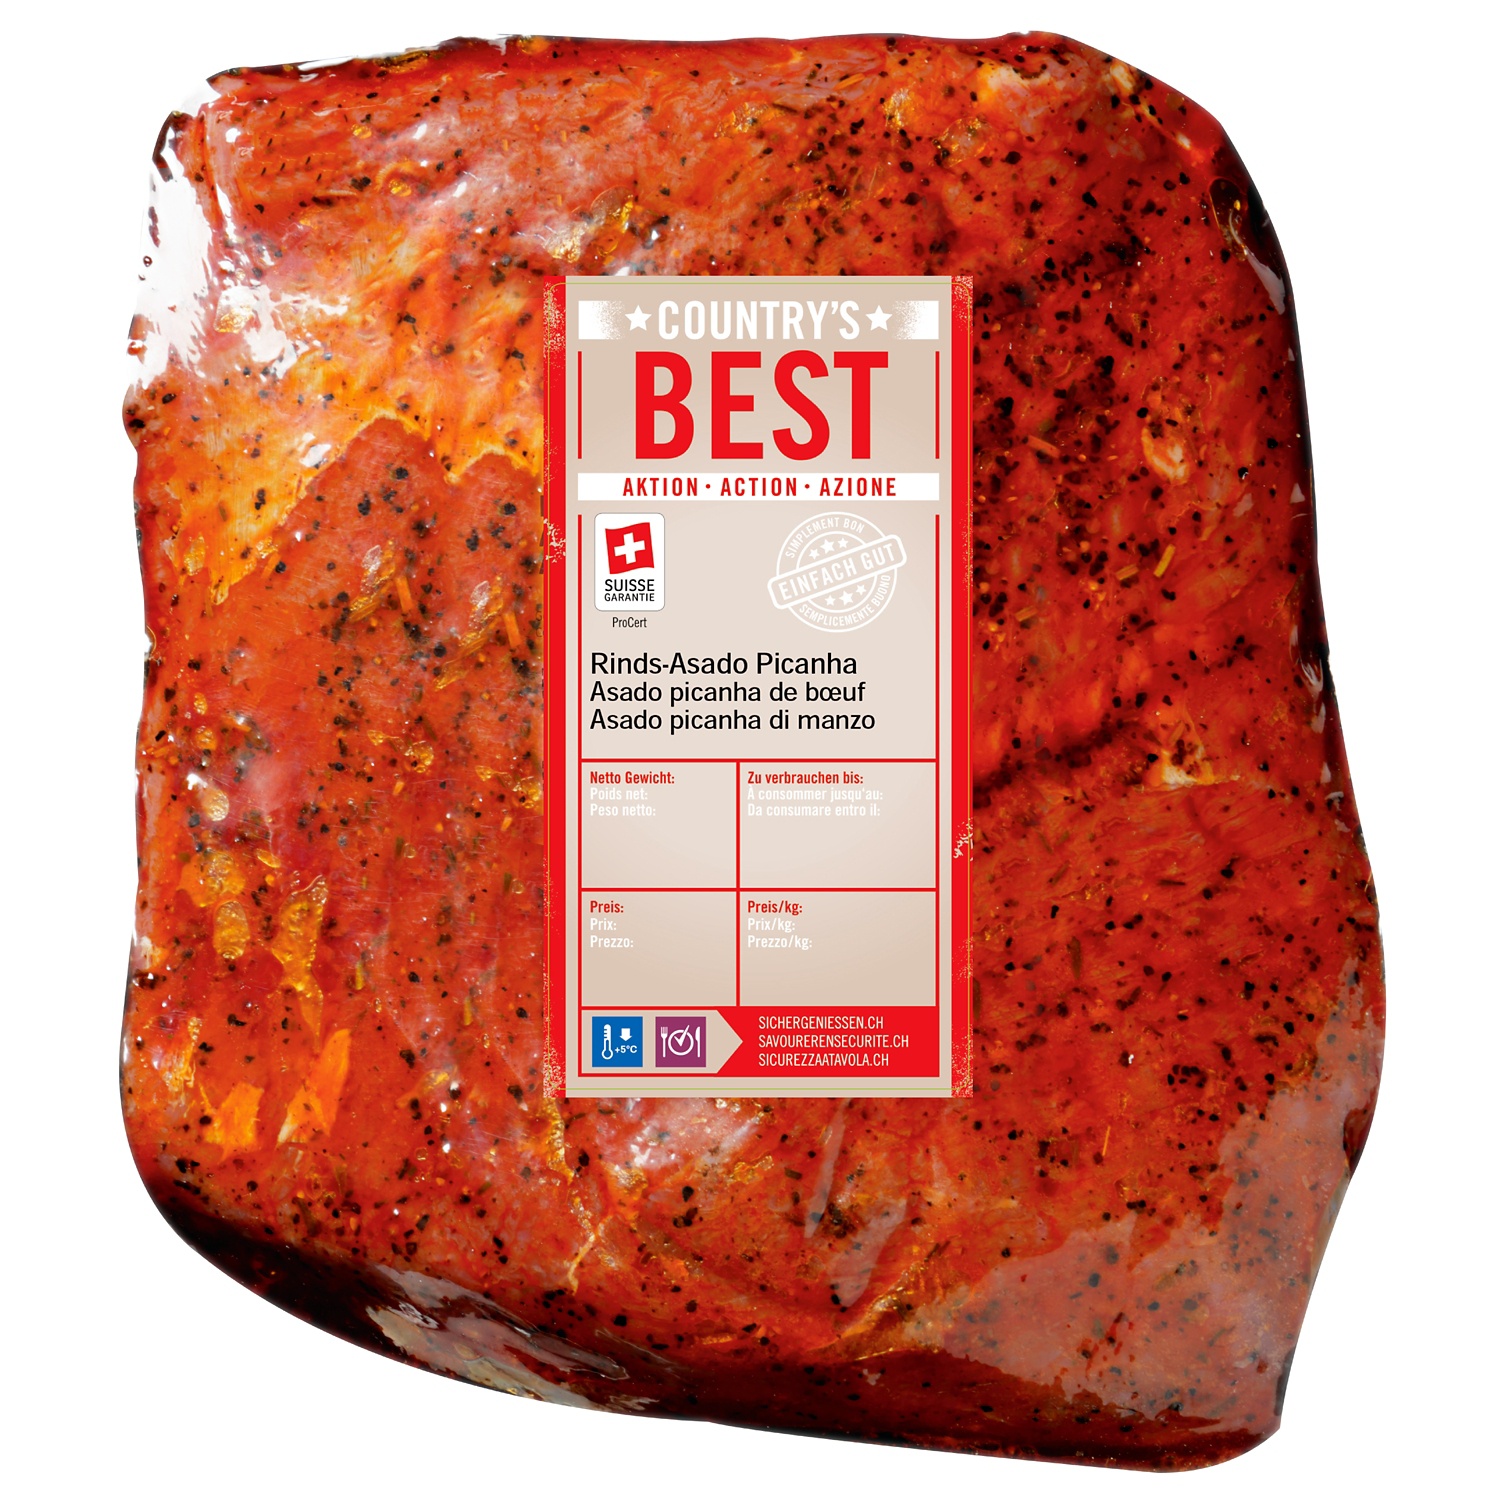 COUNTRY'S BEST Rinds-Asado Picanha